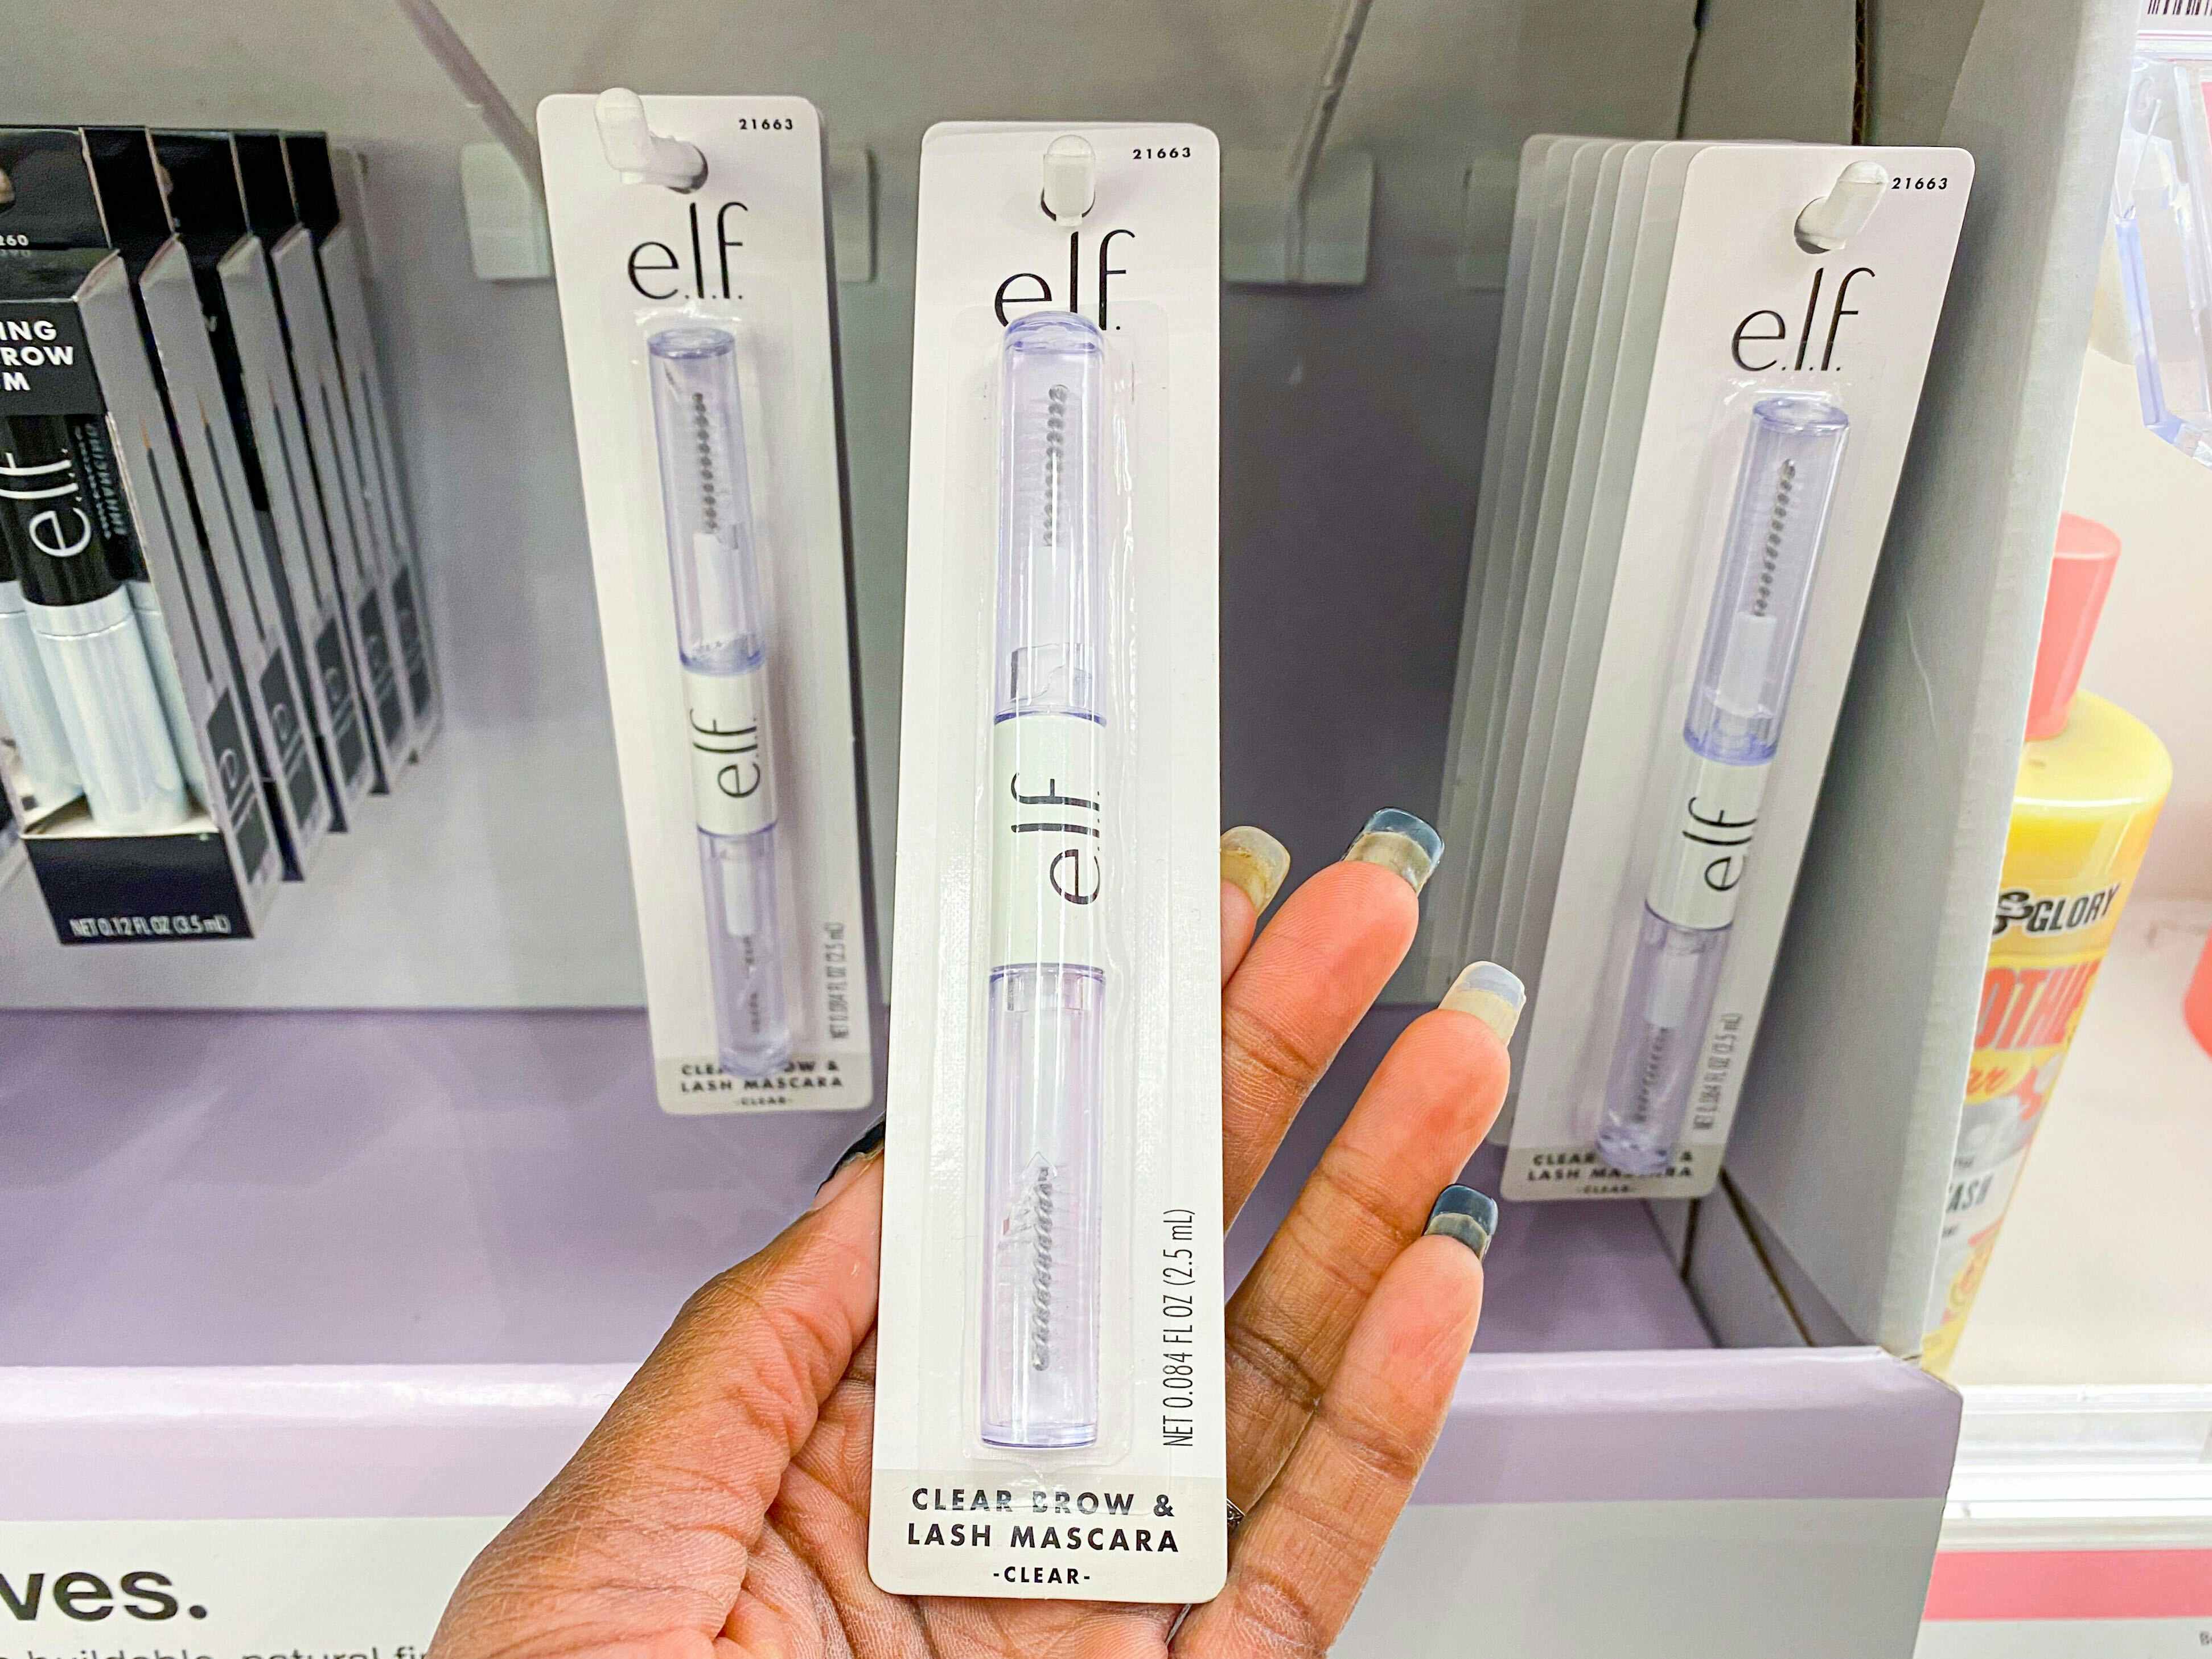 hand holding elf mascara out in target store